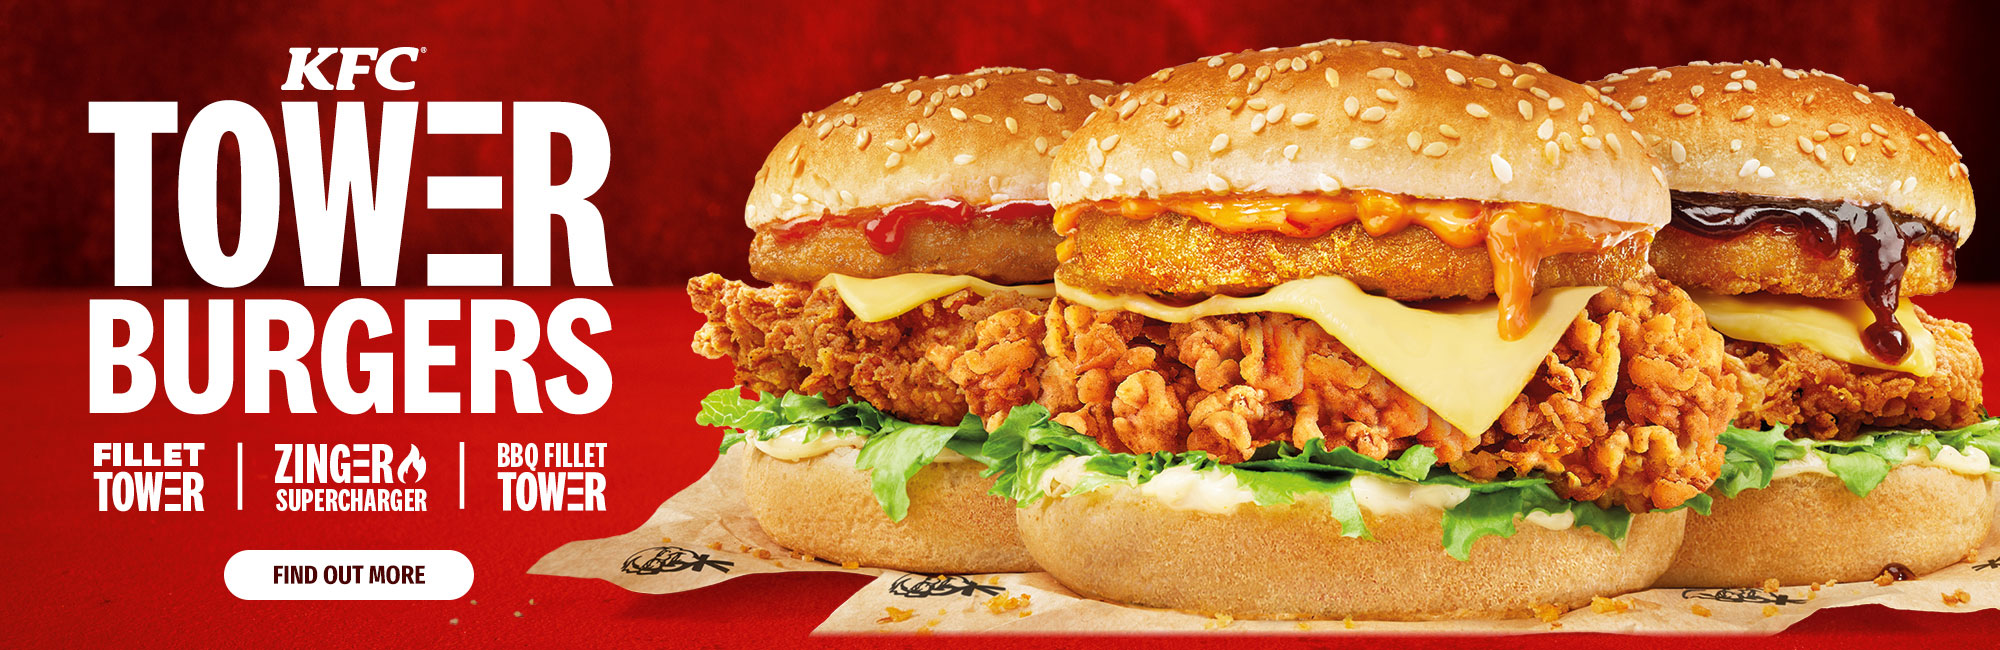 KFC - Tasty and Delicious Tower Burgers